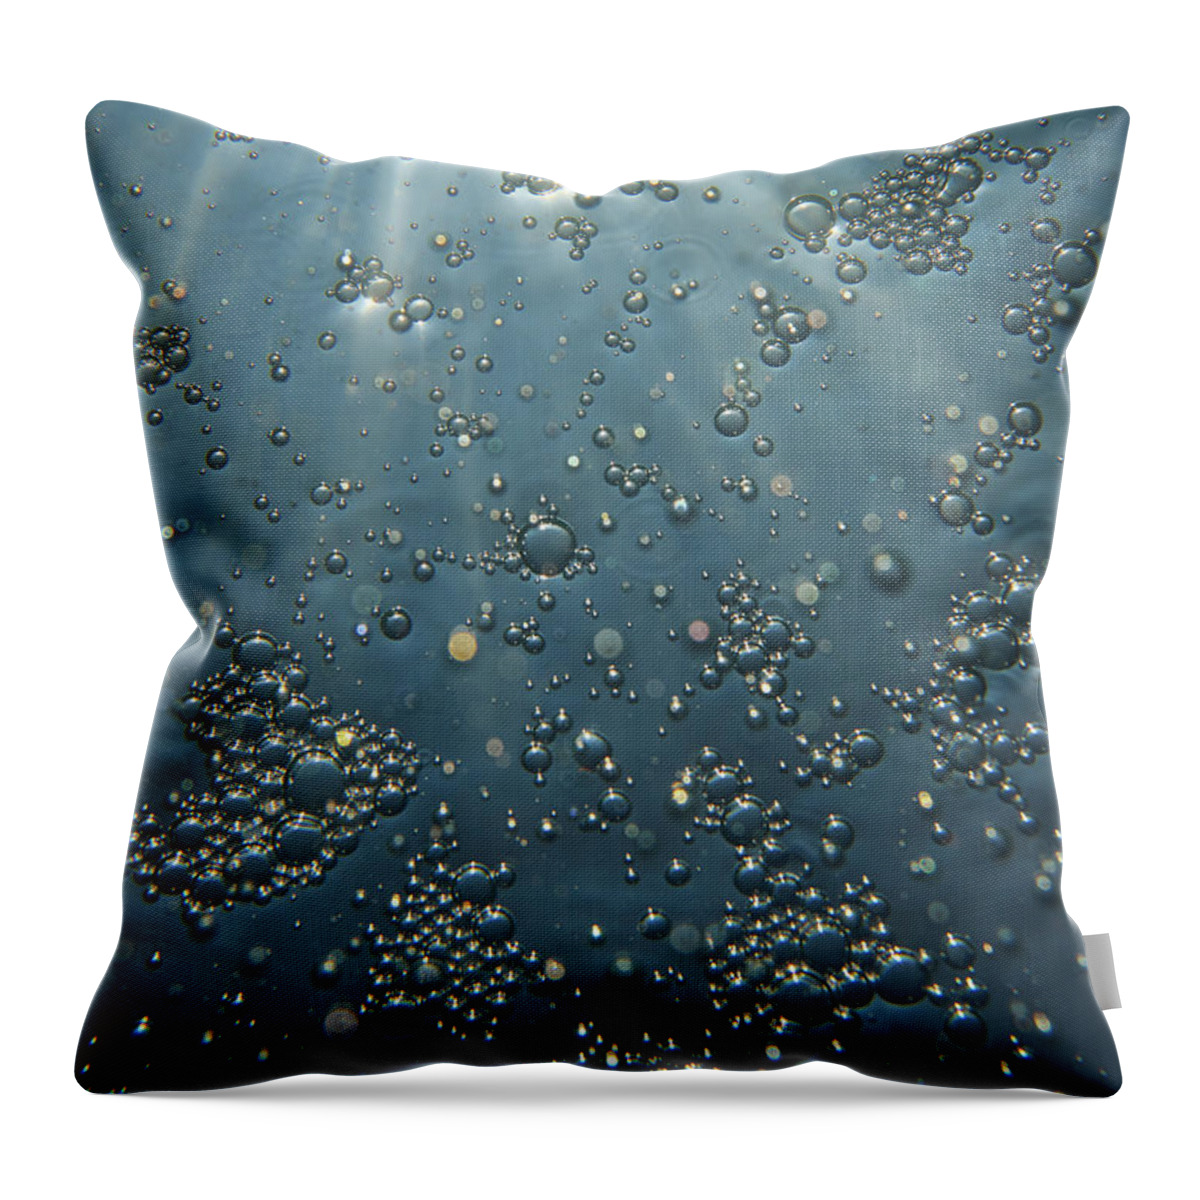 Bubbles Throw Pillow featuring the photograph Underwater Bubbles by Christopher Johnson